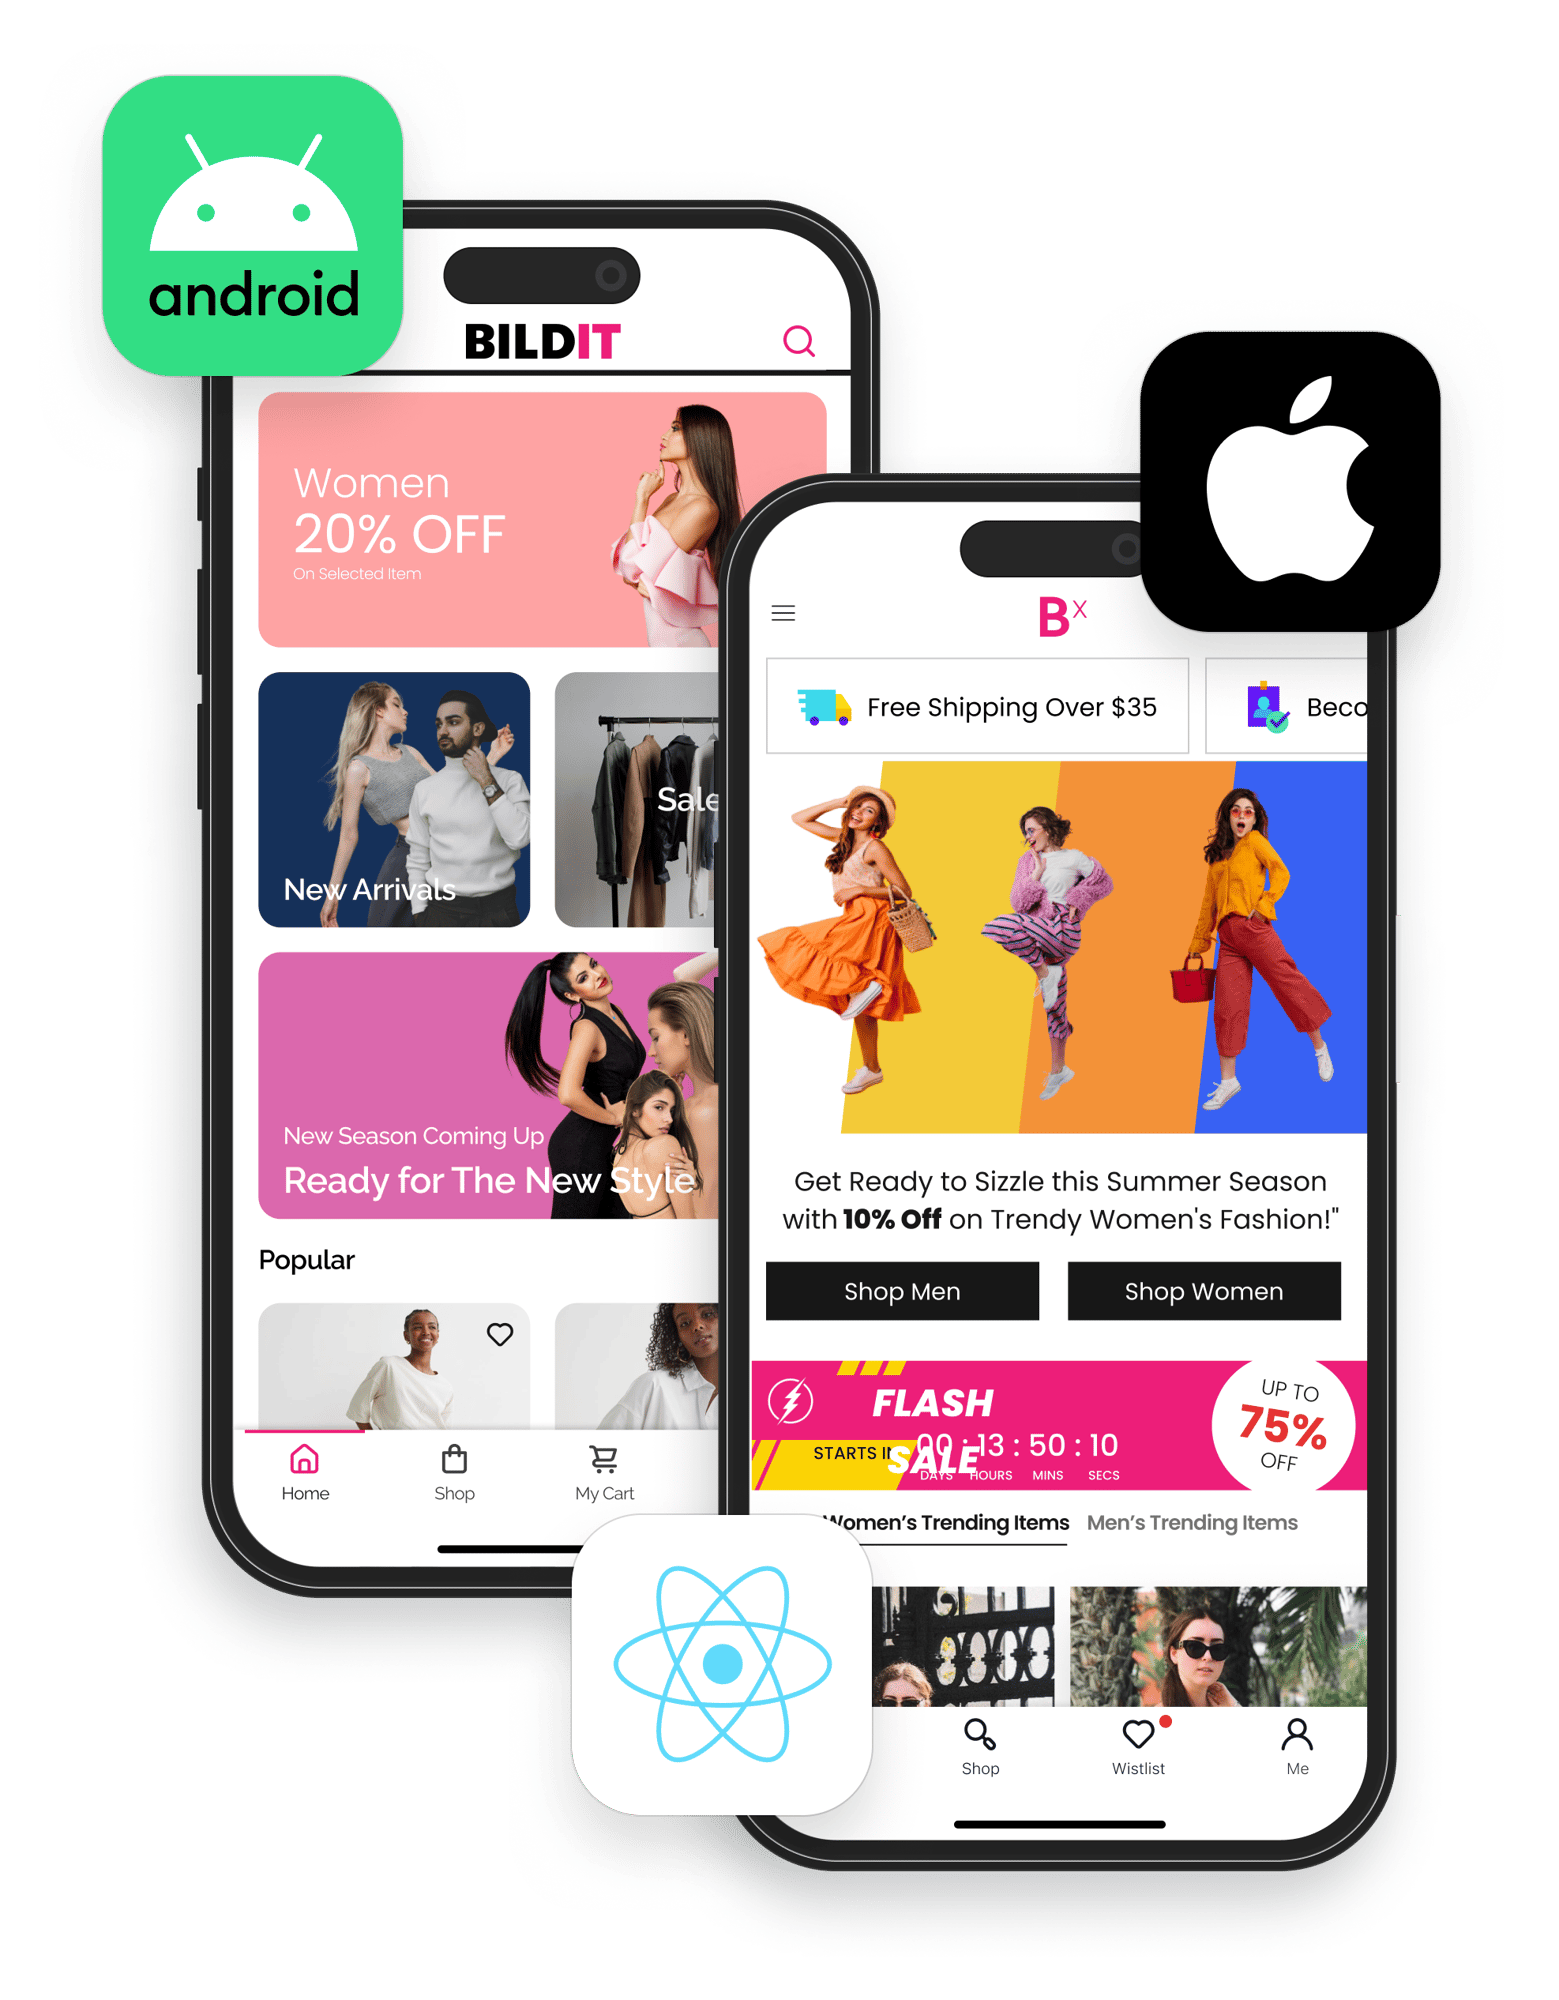 The image displays two smartphones side by side, one with an Android logo and the other with an Apple logo, each screen showing a different layout of the same e-commerce app named BILDIT. The Android phone on the left displays a pink-themed promotion for 